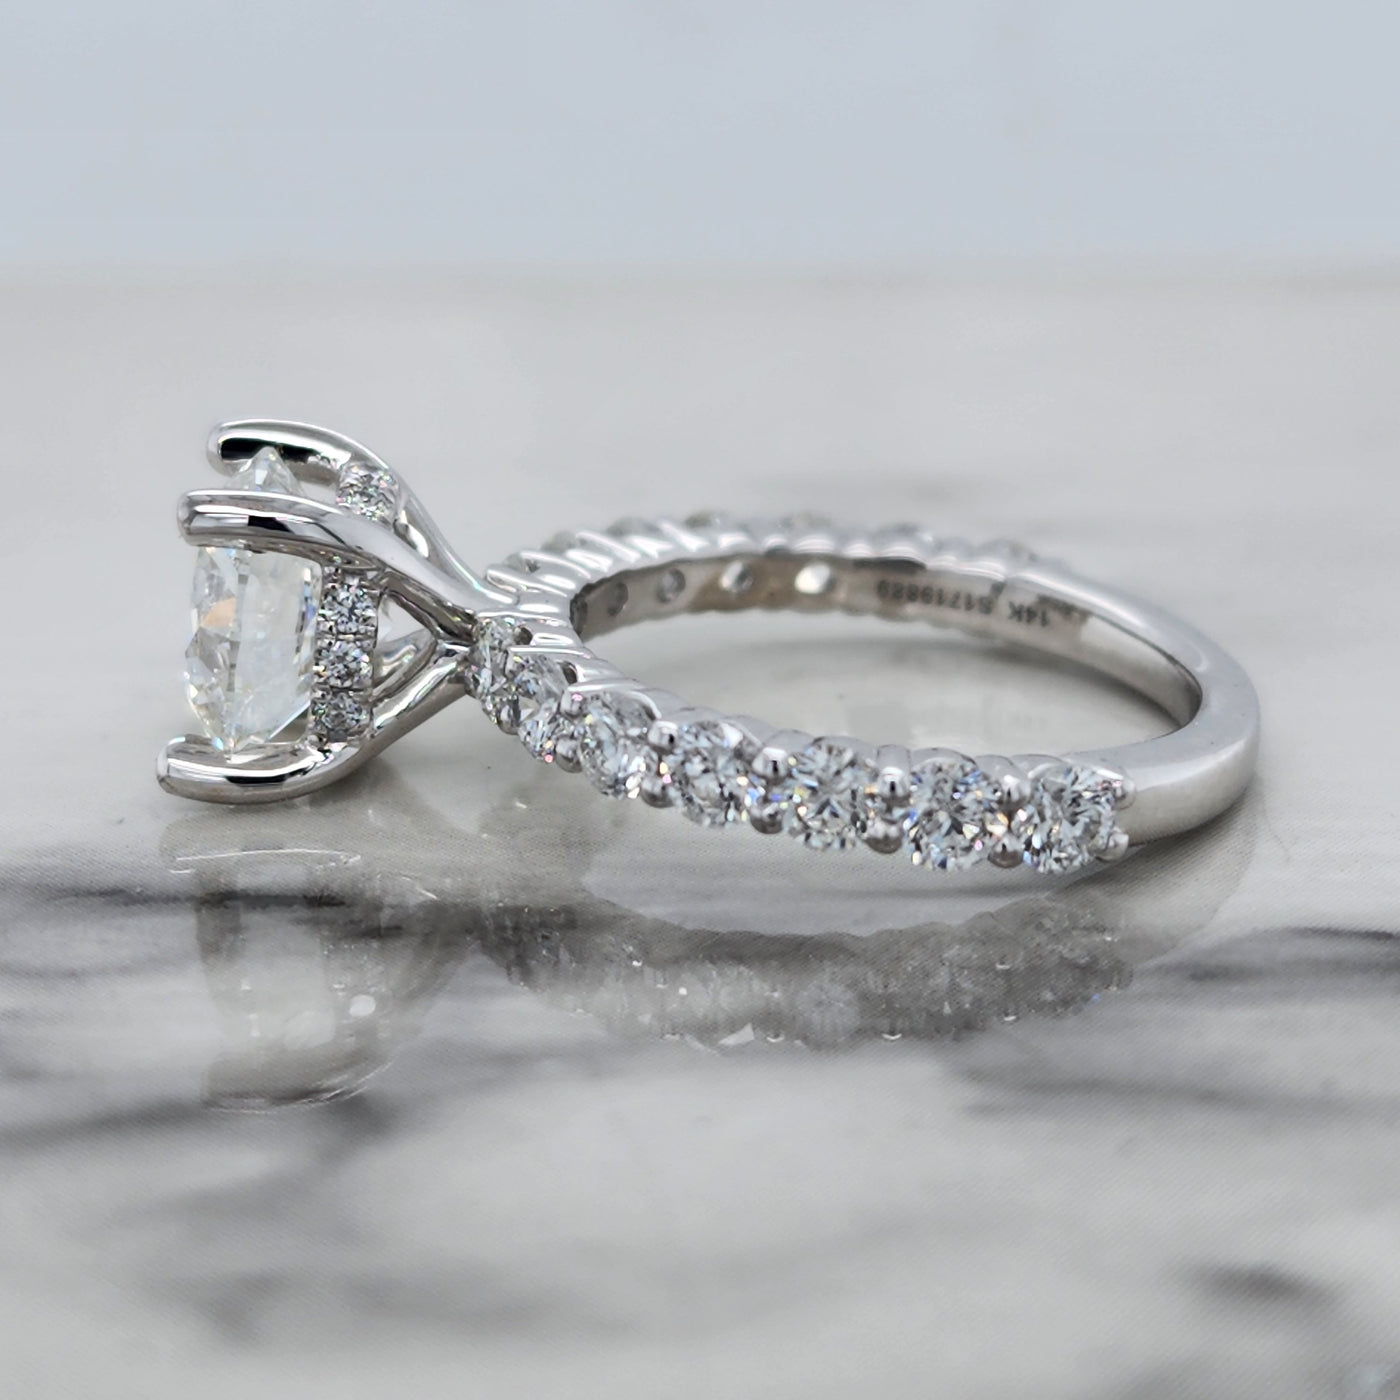 White Gold Engagement Ring With Round Center Stone and Hidden Halo